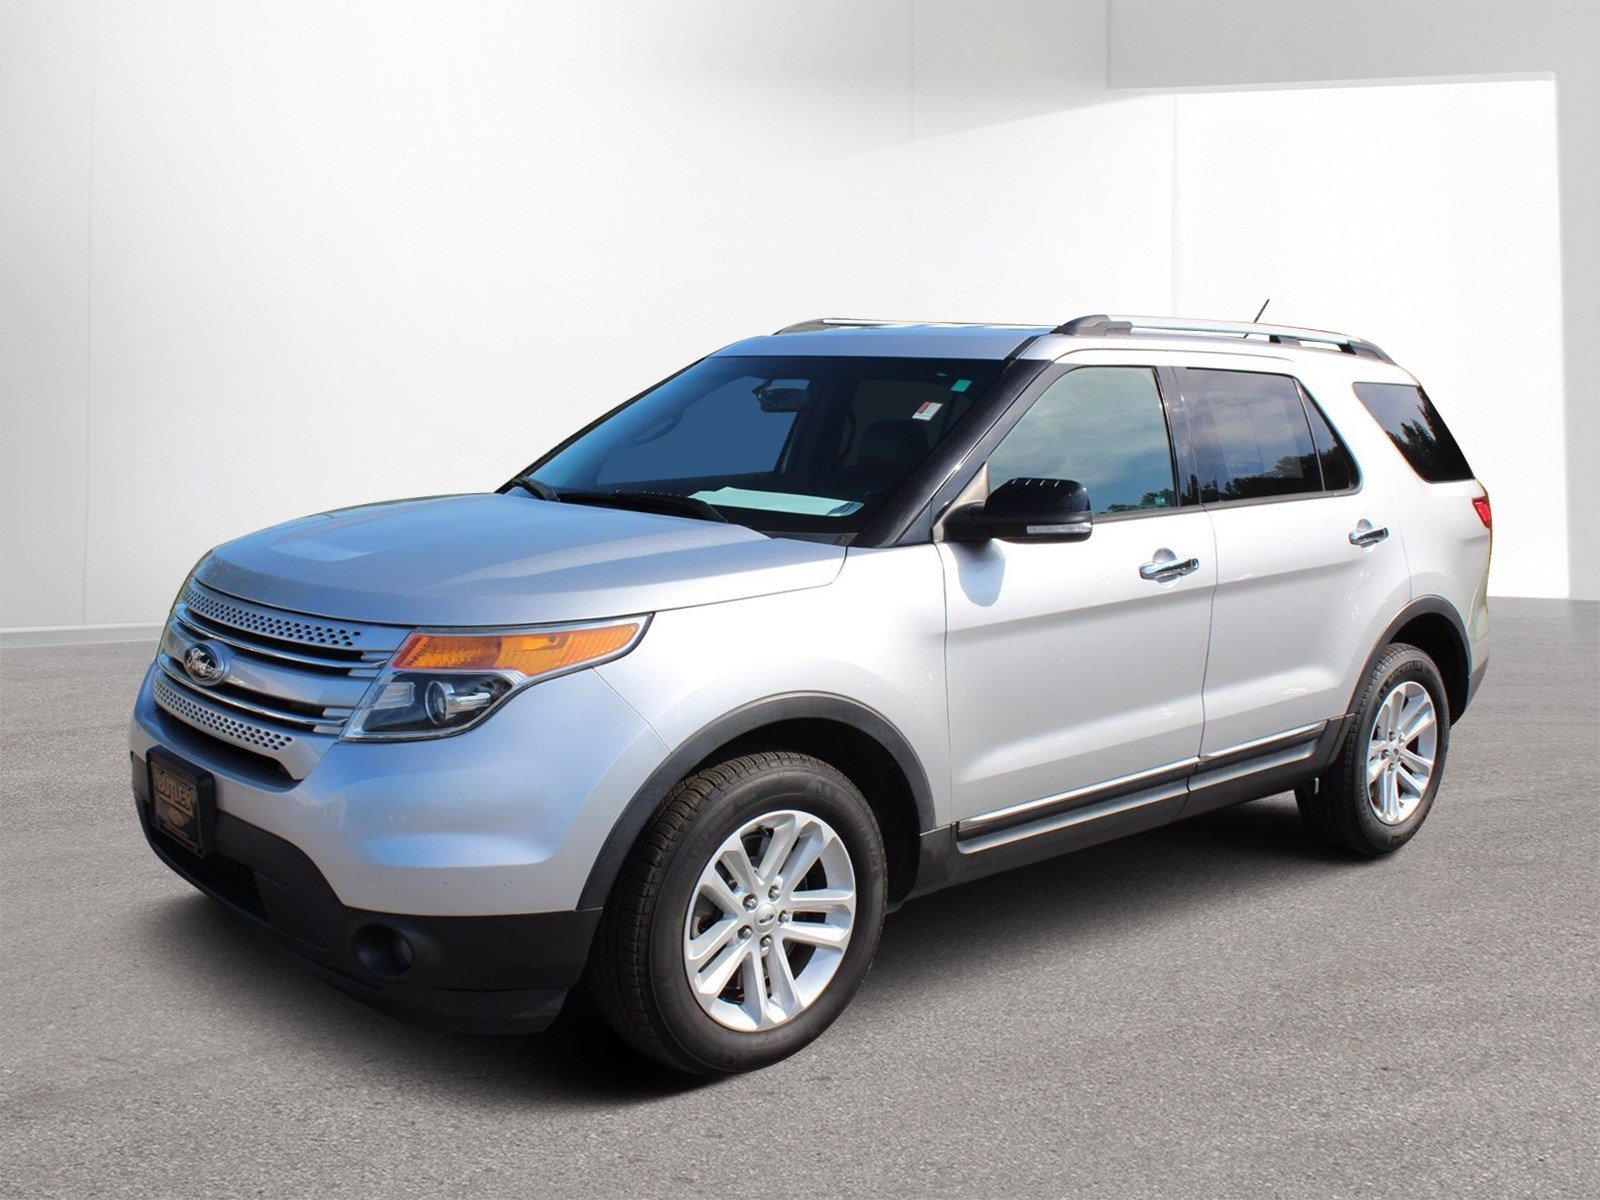 Pre-Owned 2013 Ford Explorer XLT Sport Utility in Milledgeville #